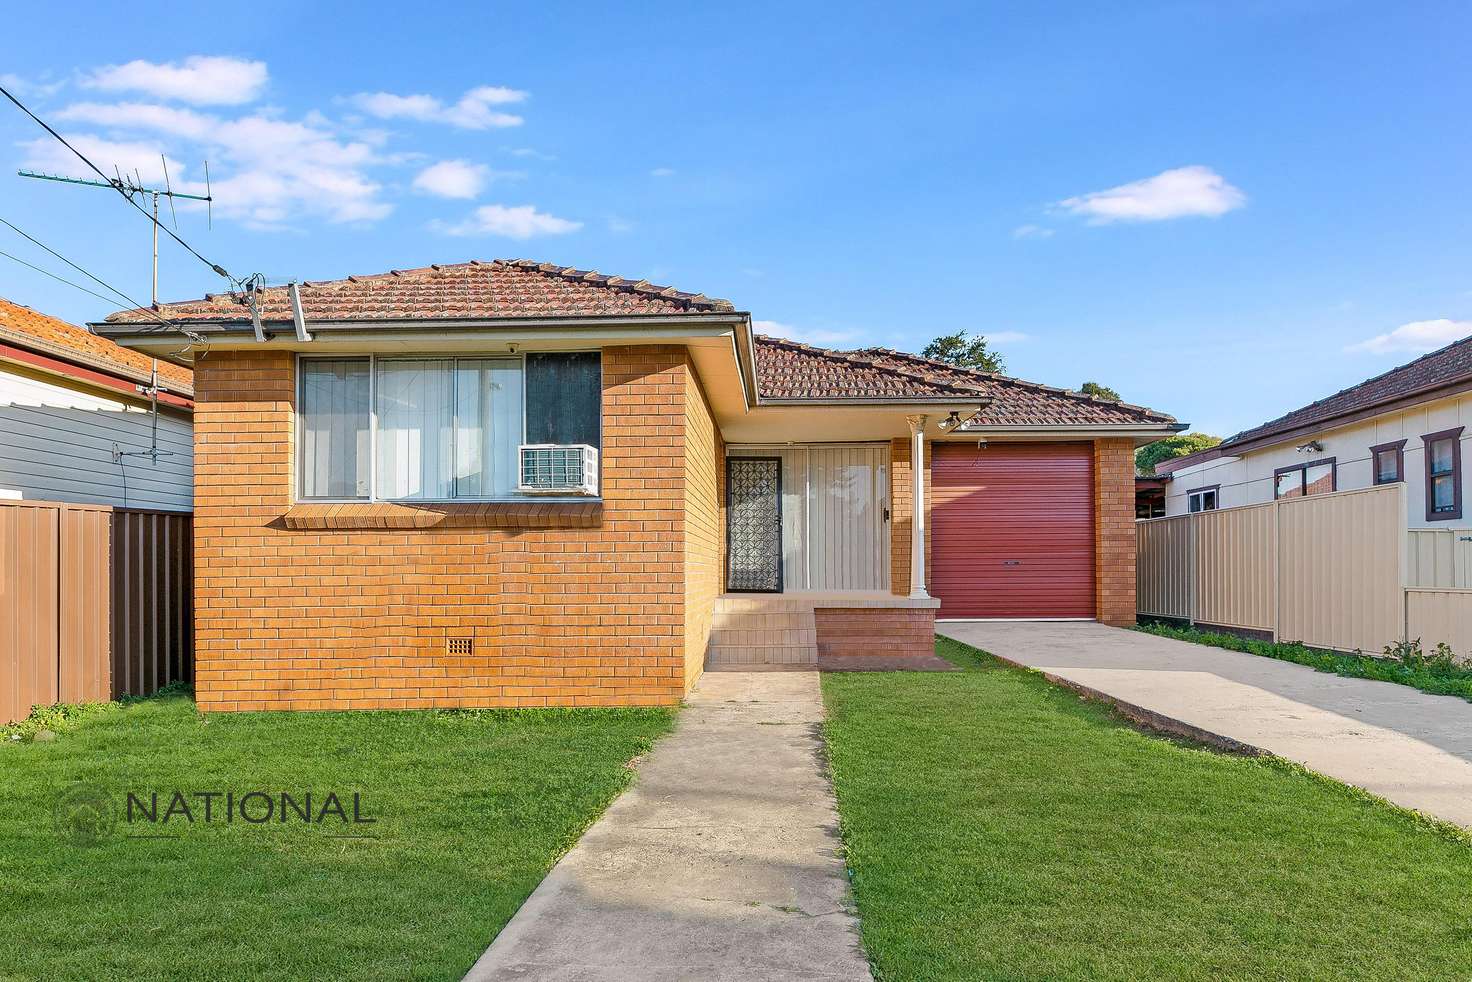 Main view of Homely house listing, 20 McArthur St, Guildford NSW 2161